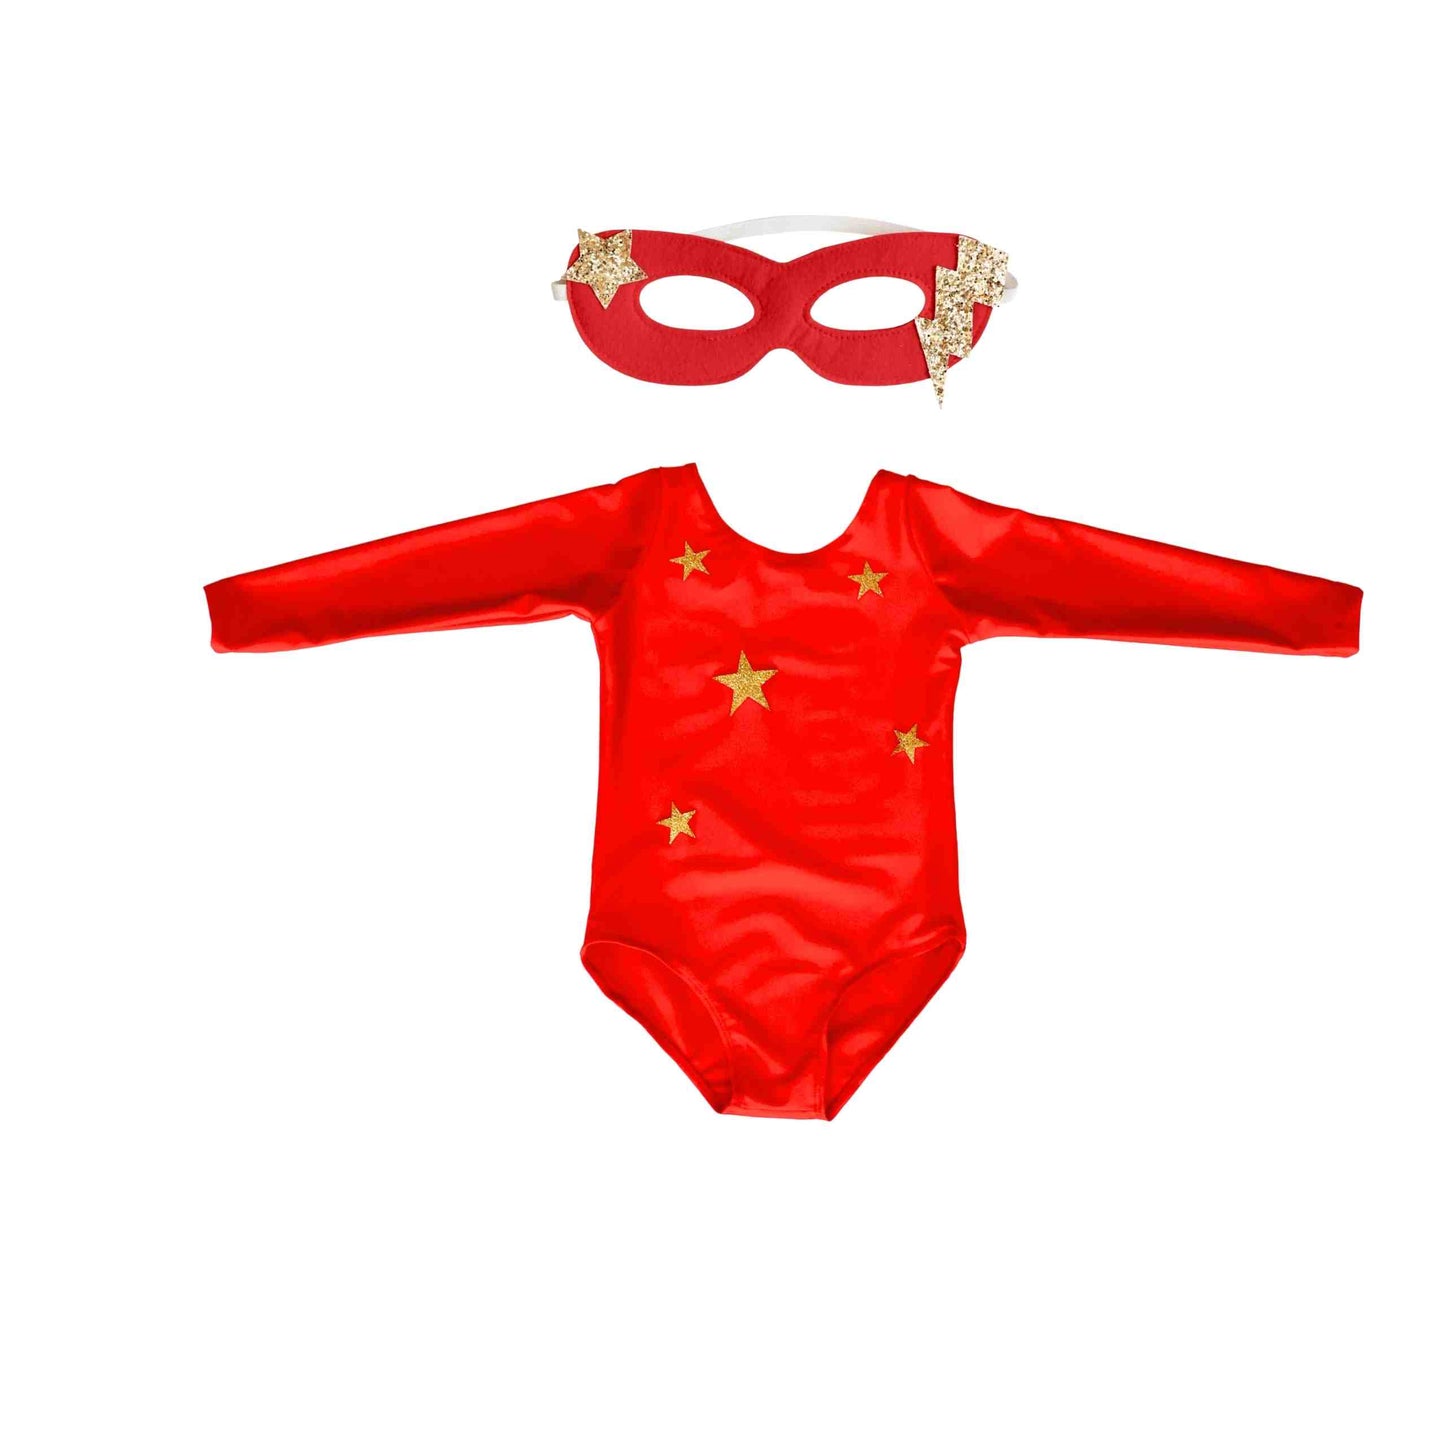 All Star Leotard With Set Options, Red